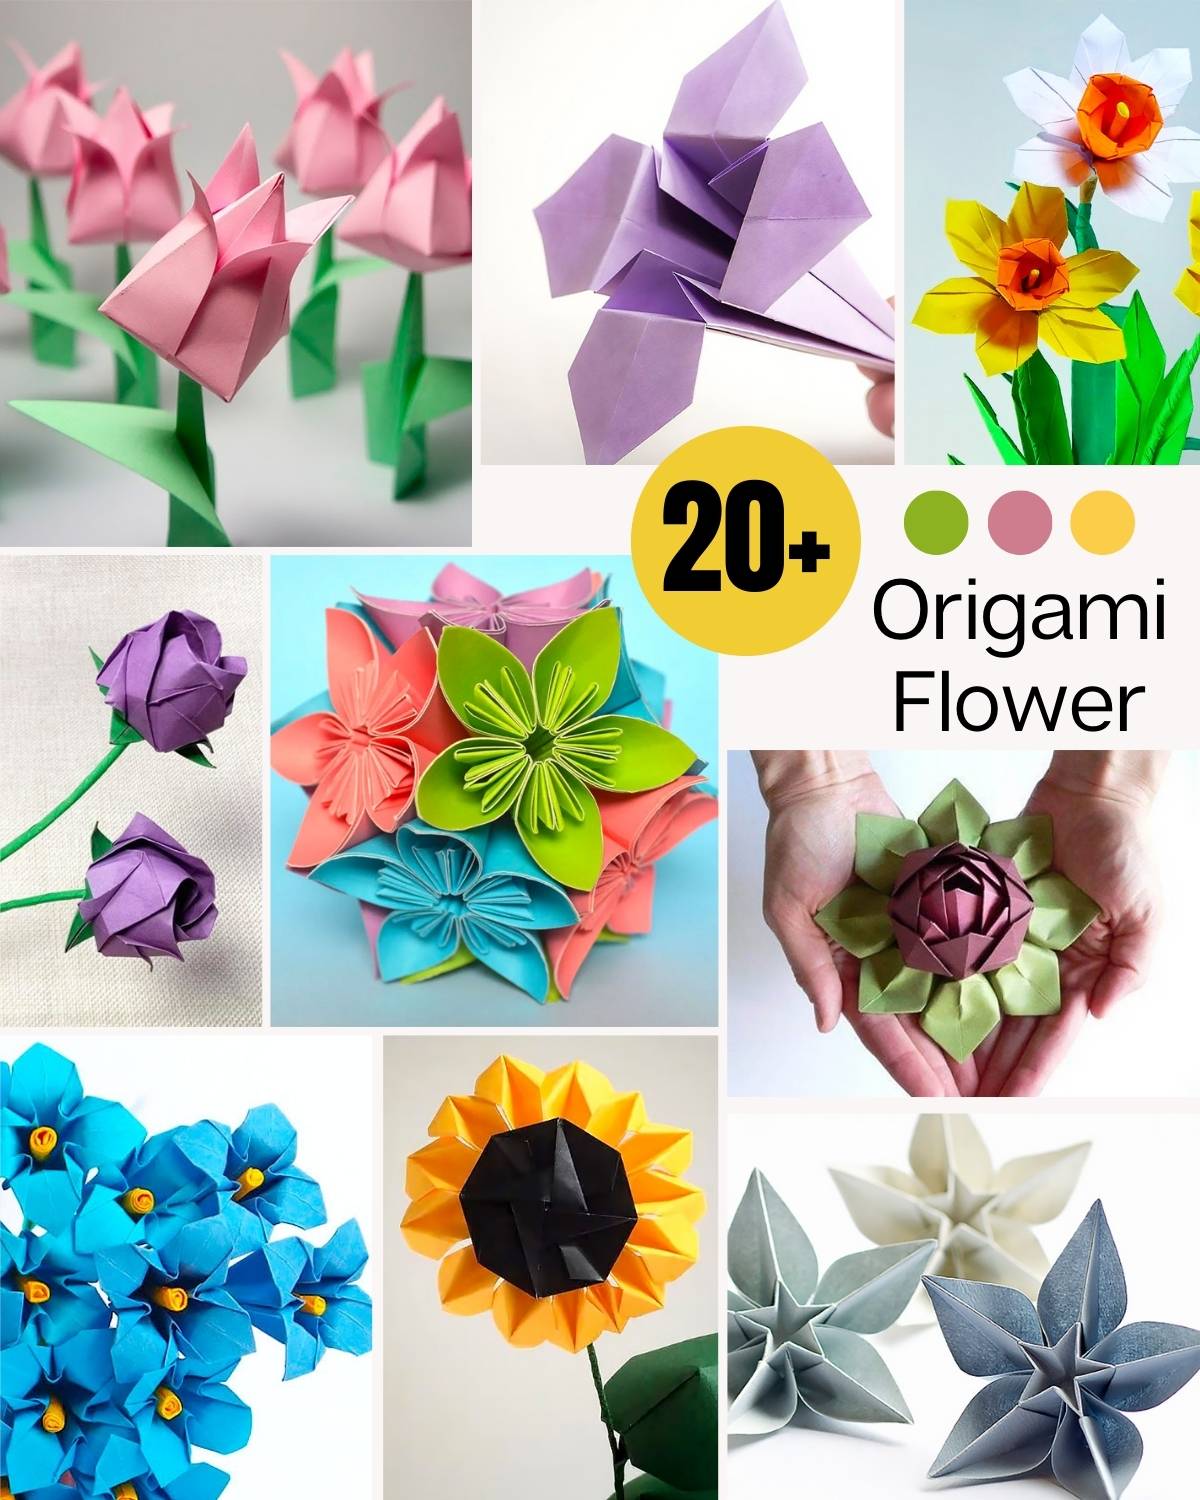 With these small origami flower projects, you can practice and give an evergreen flower to a loved one. Learn how to make origami flowers from over 20 tutorials. 